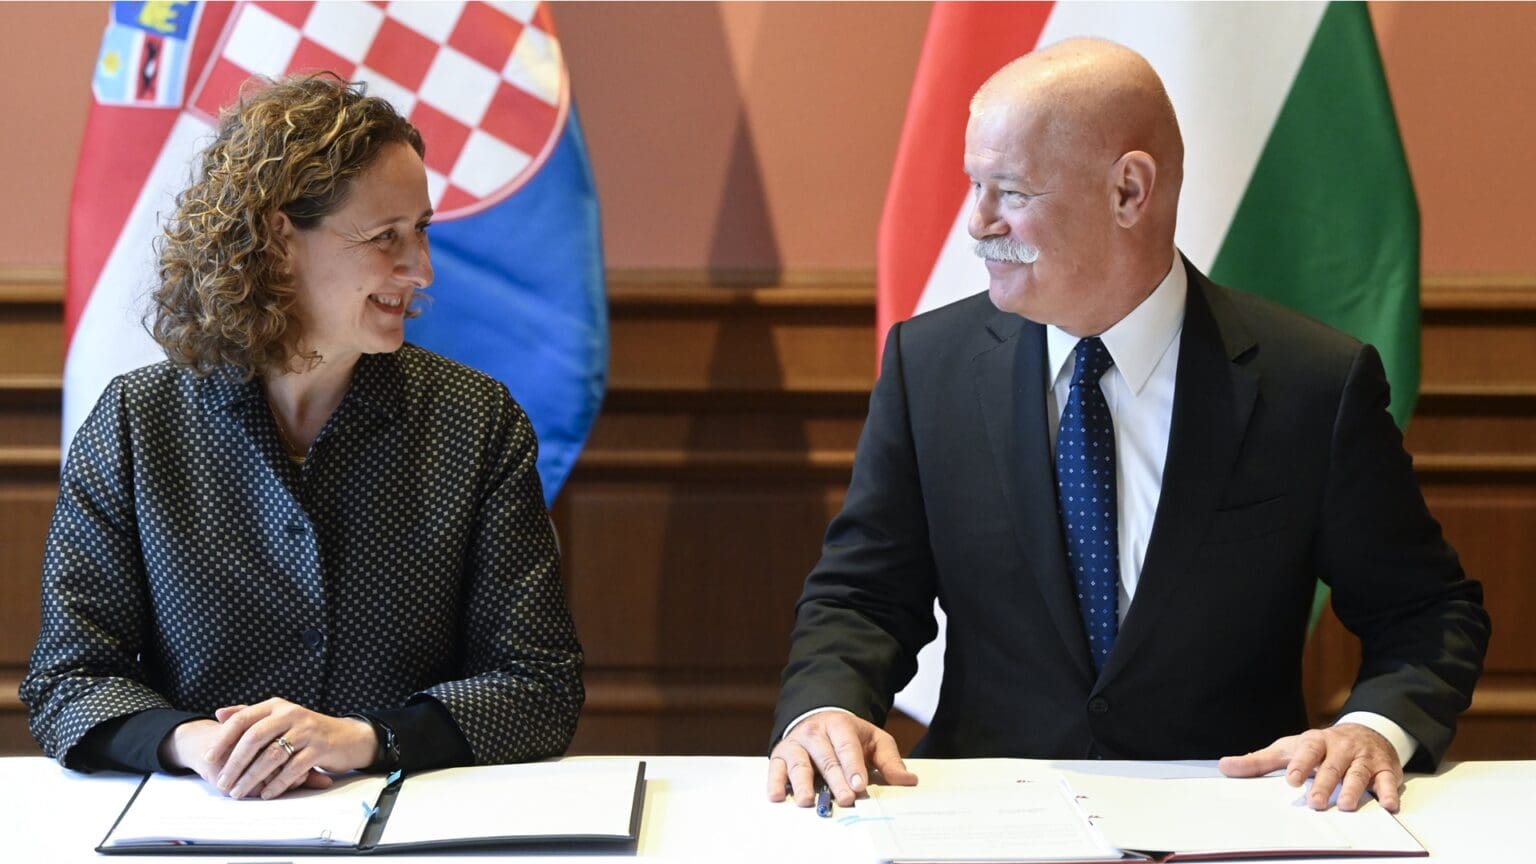 Hungary, Croatia Sign Expansion of Cultural Cooperation Agreement